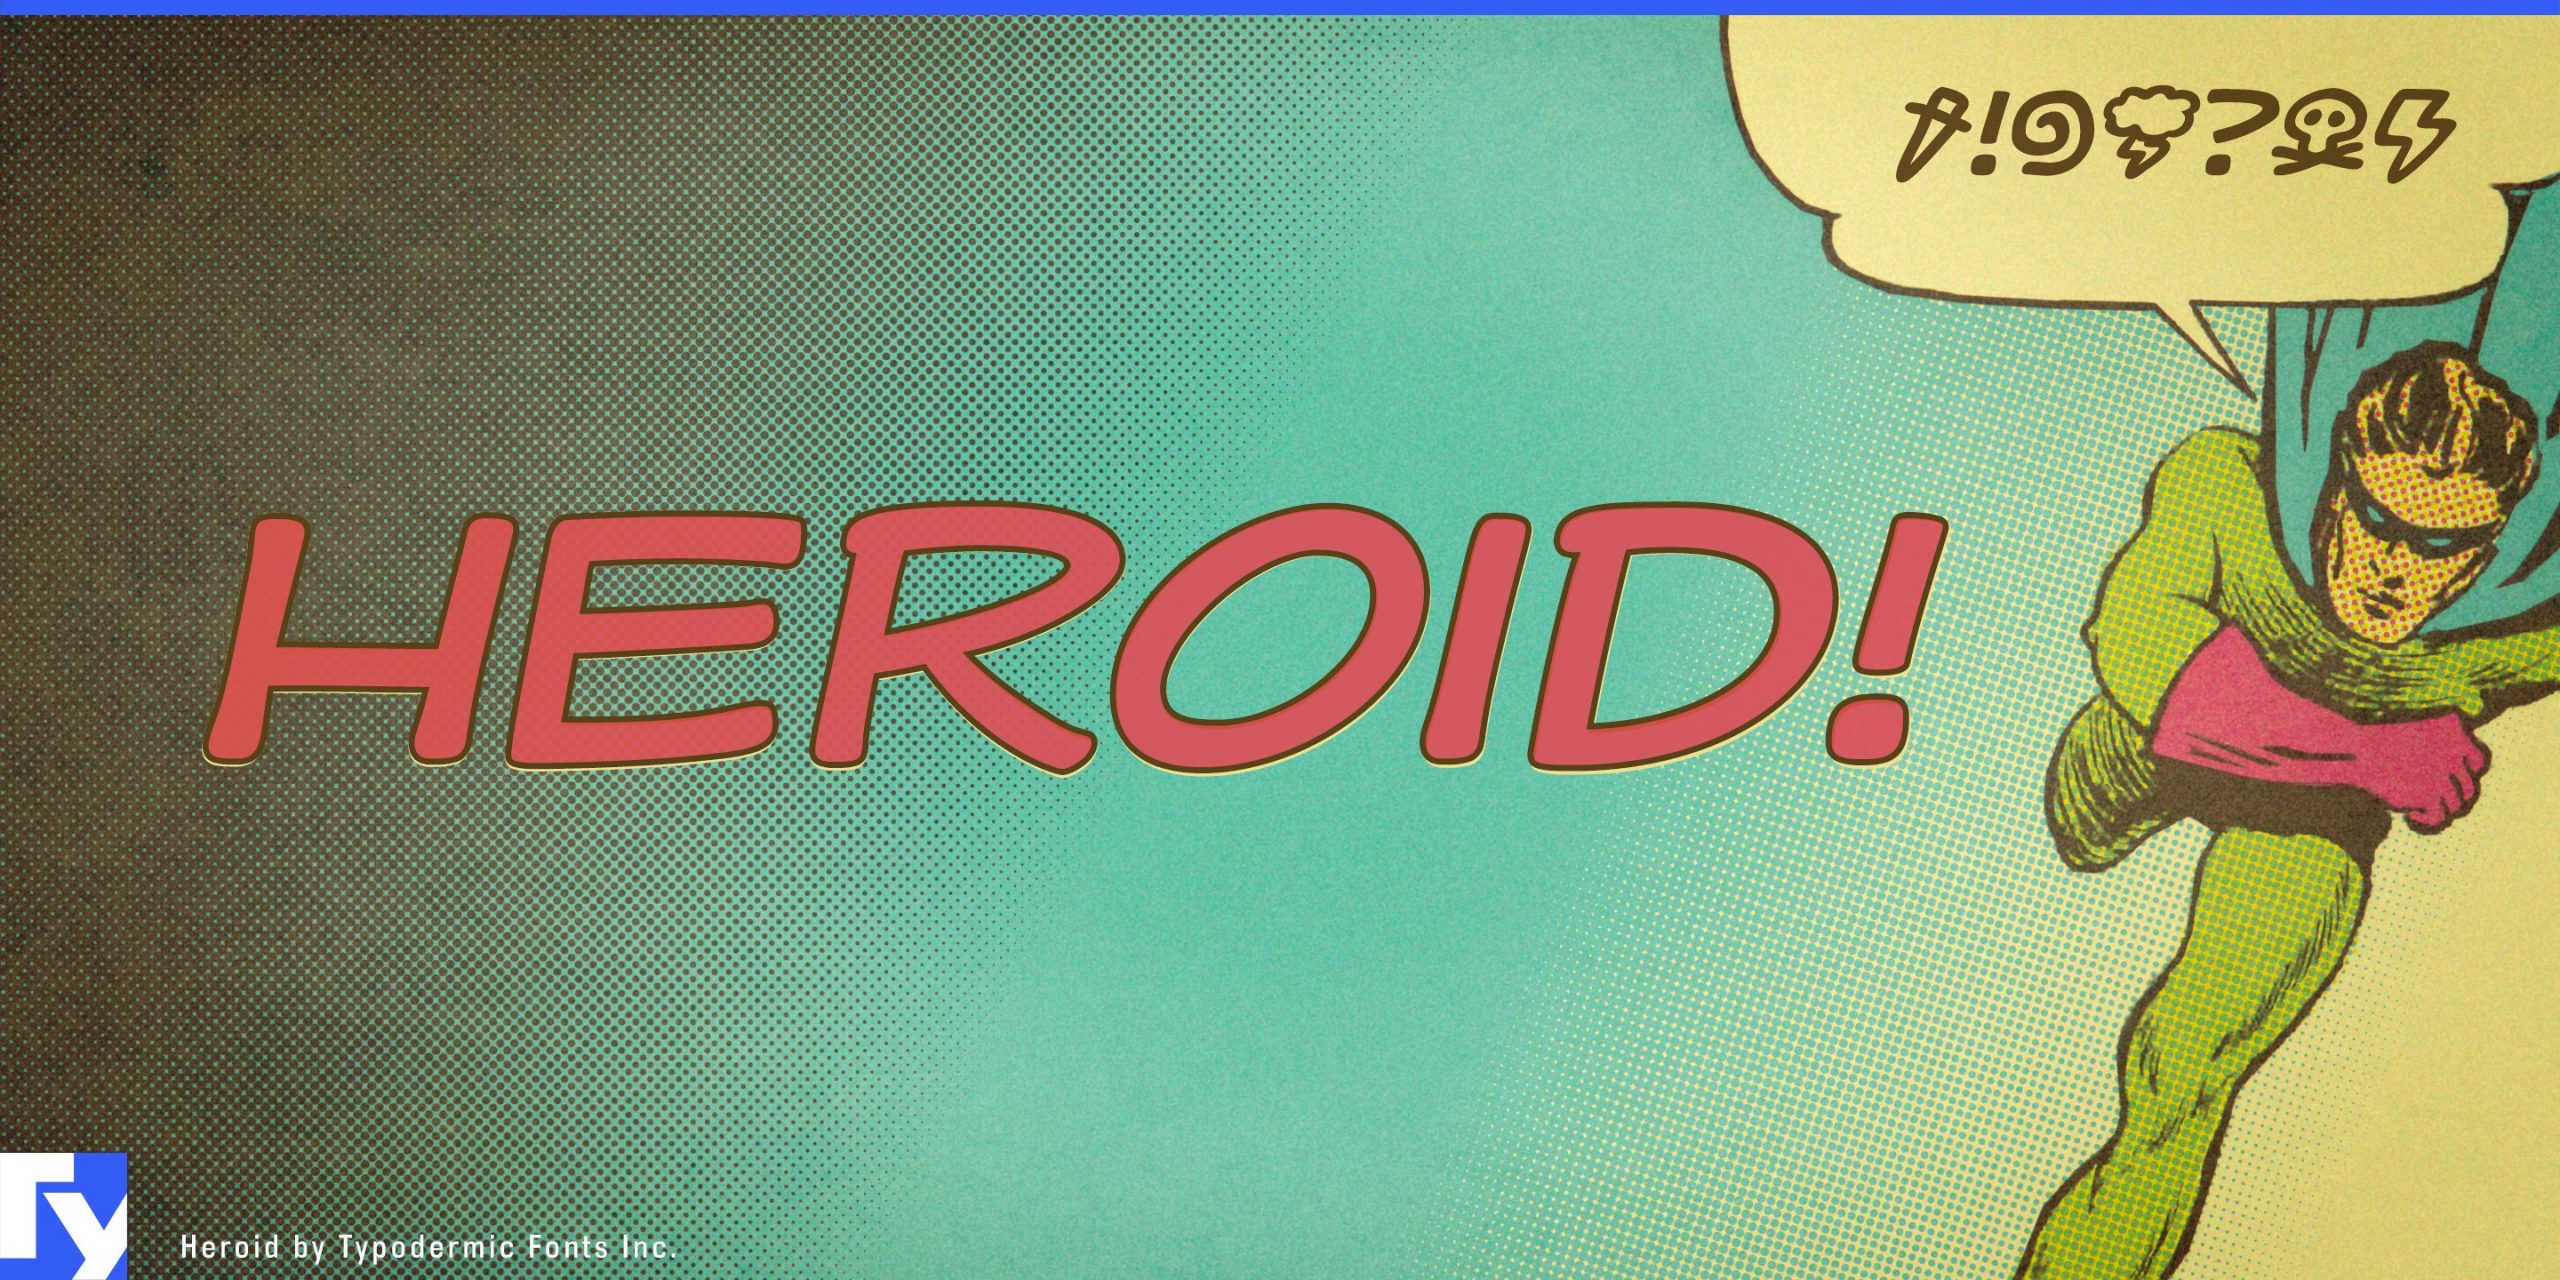 Stand Out from the Crowd with Heroid's Bold Letterforms